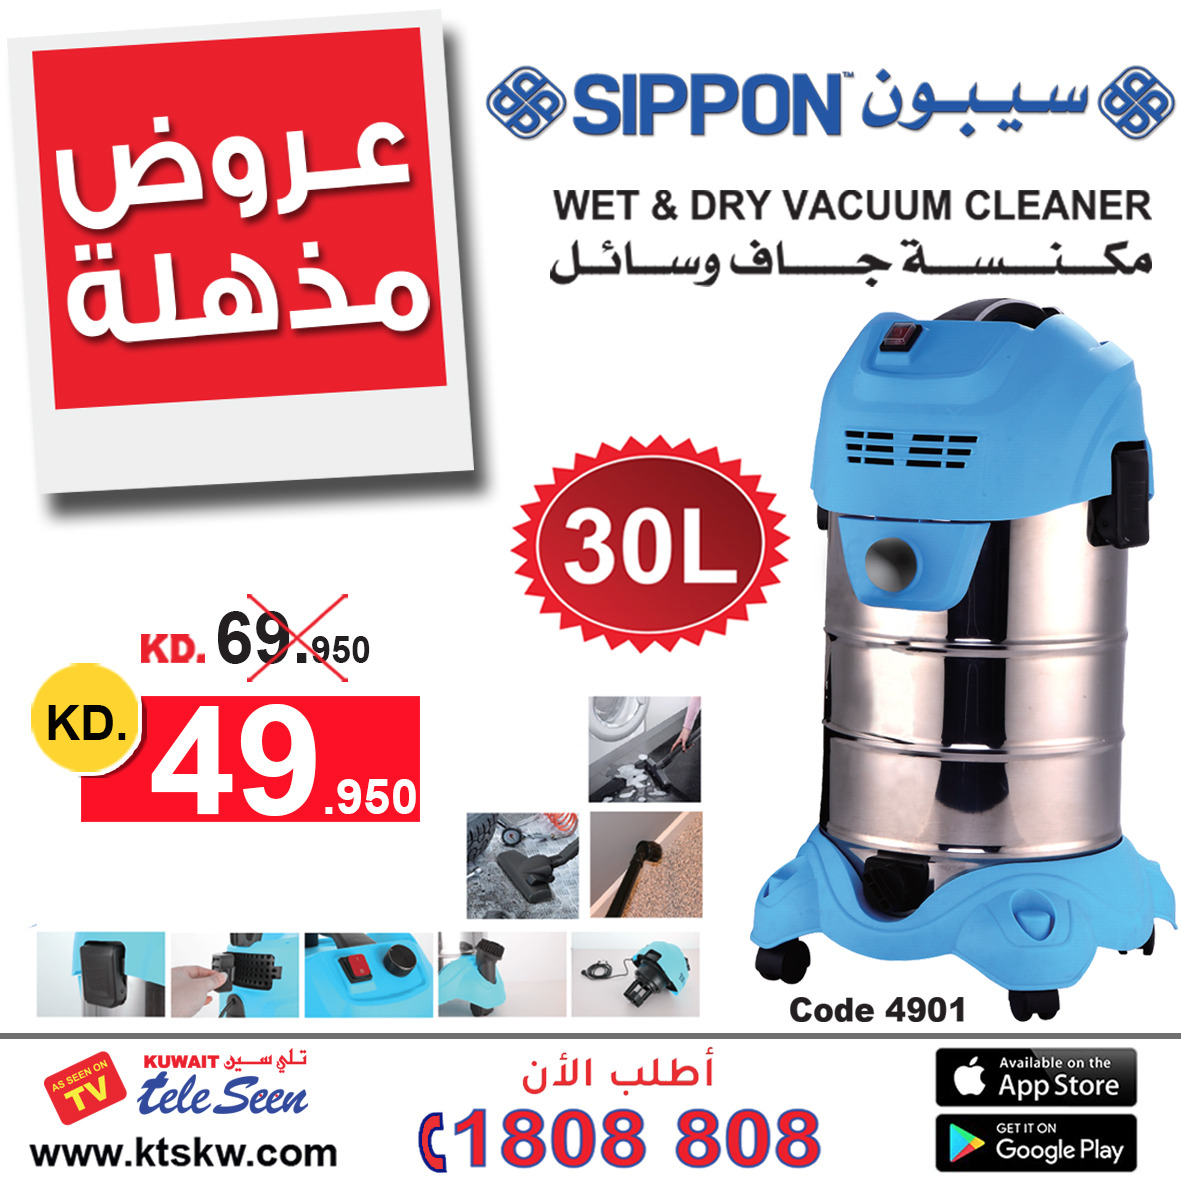 sippon wet and dry